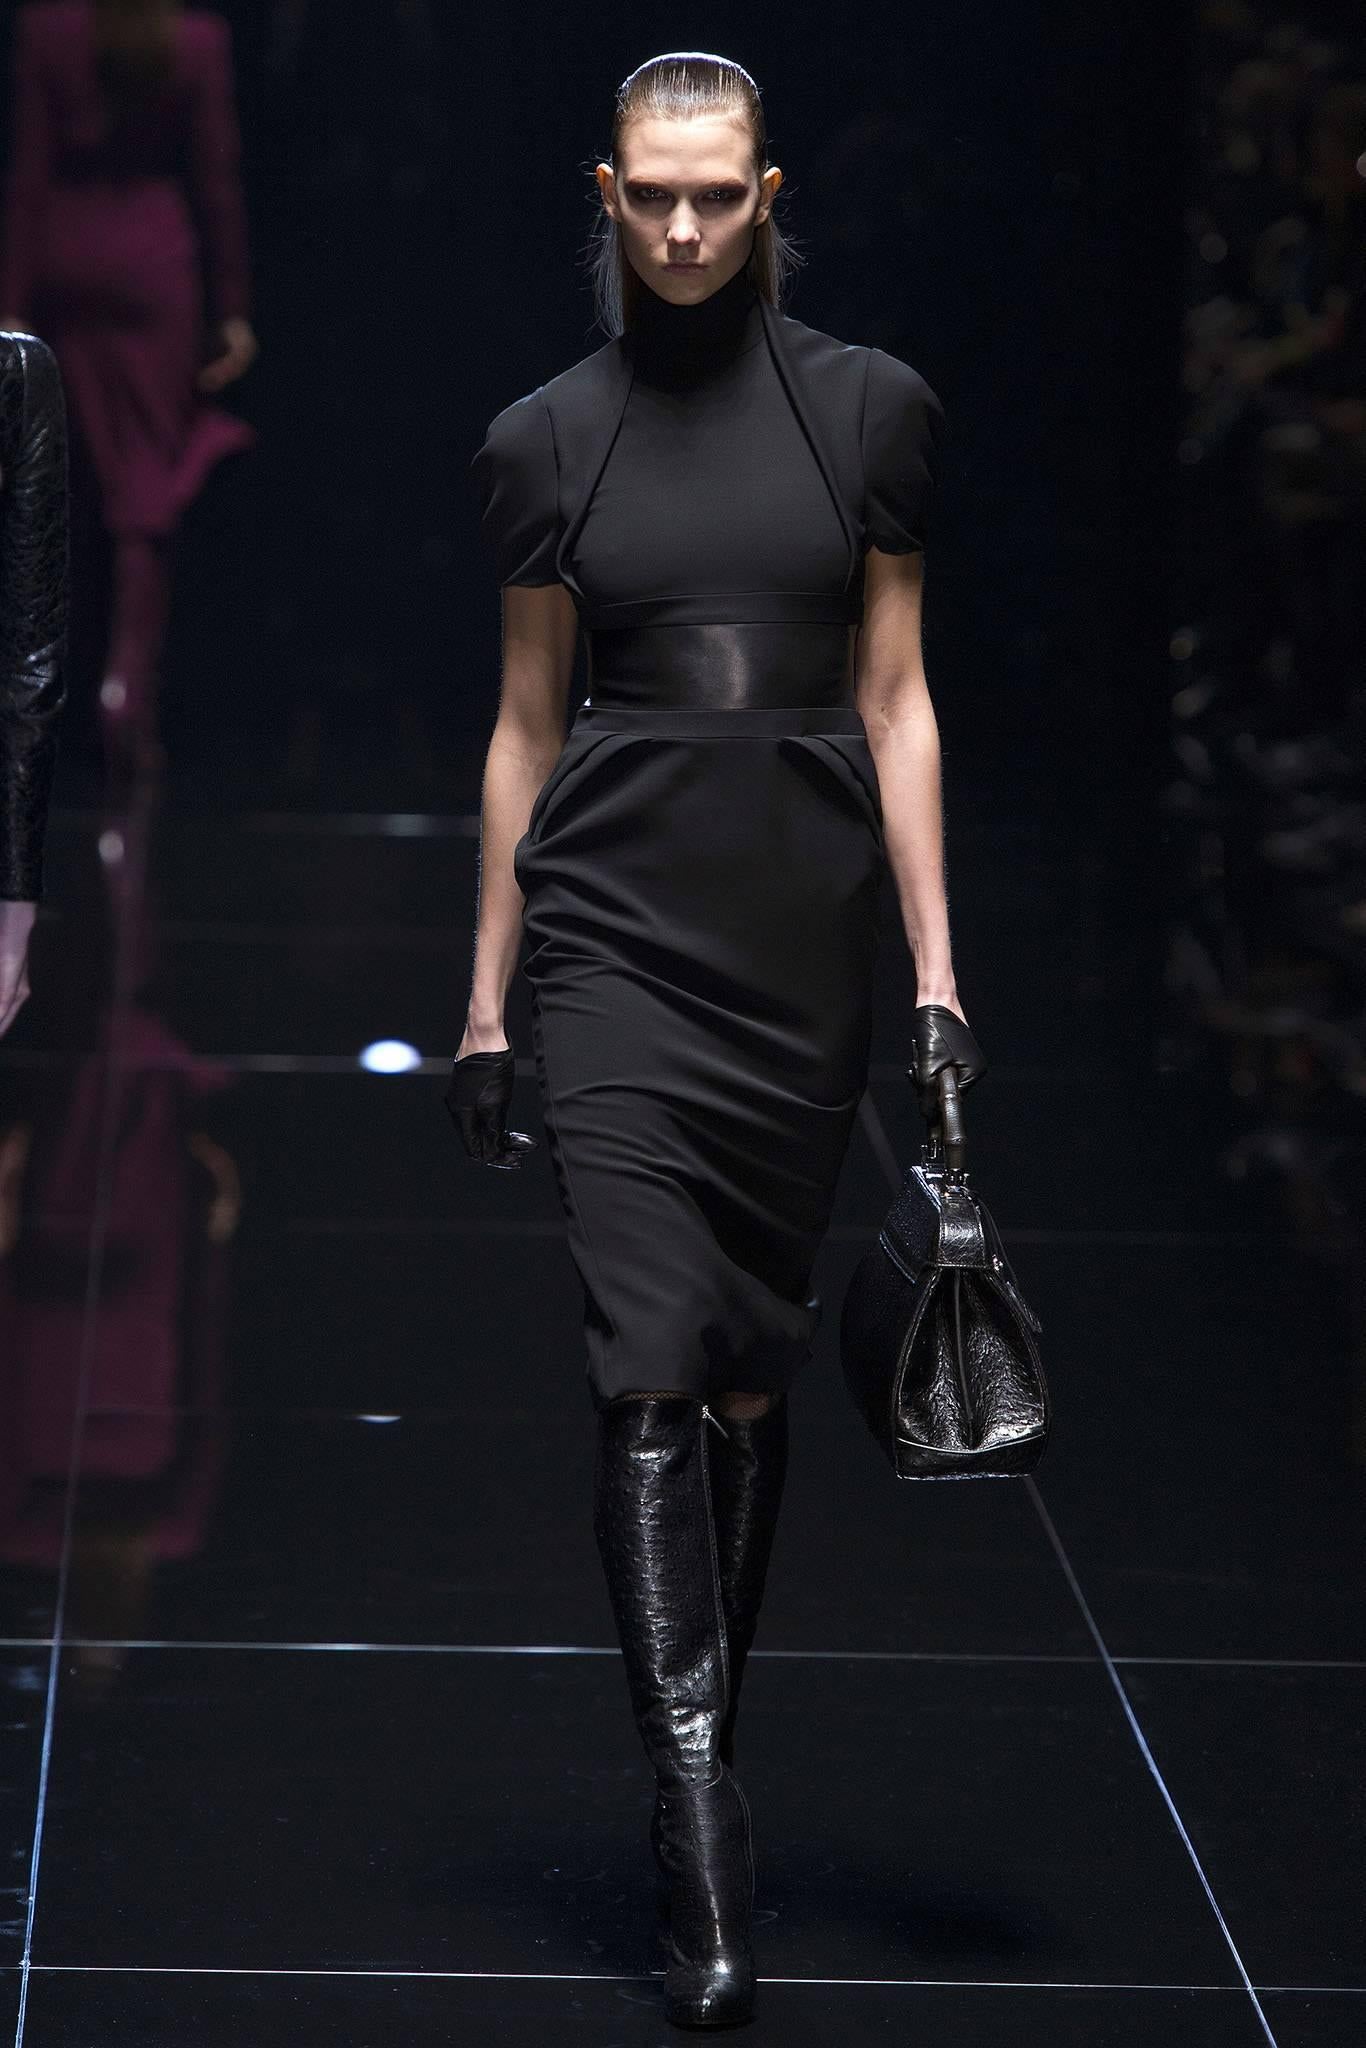 Gucci Fall 2013 runway Black Dress with Leather Waist.  Tagged size IT 42 USA 6.  To fit 34" at bust, 29" maximum waist, 37/38" hip. Shoulder seams 14", sleeve 8", back neck seam to hem 41".  79% rayon, 19 wool, 2